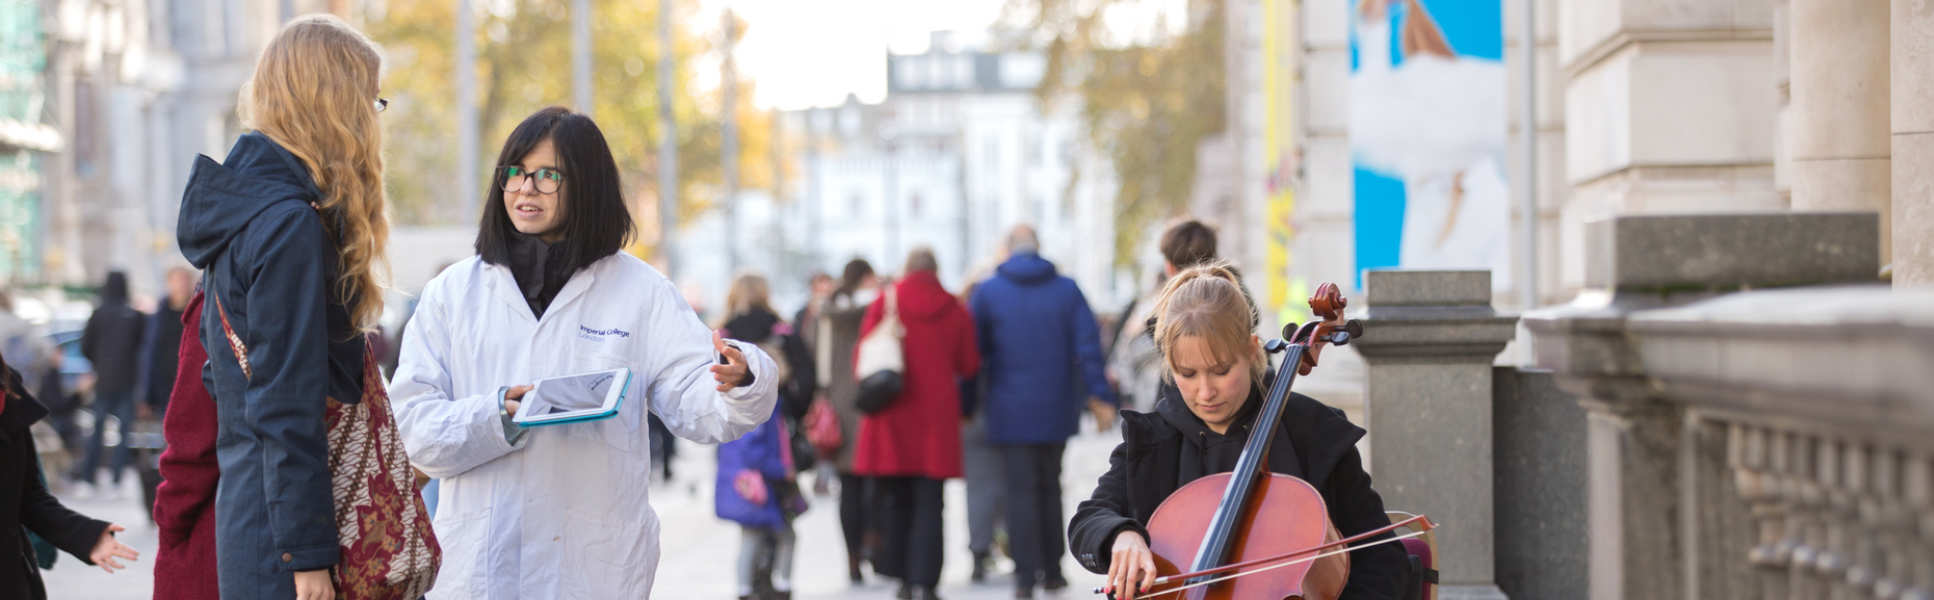 An Imperial researcher and musician engage members of the public on Exhibition road